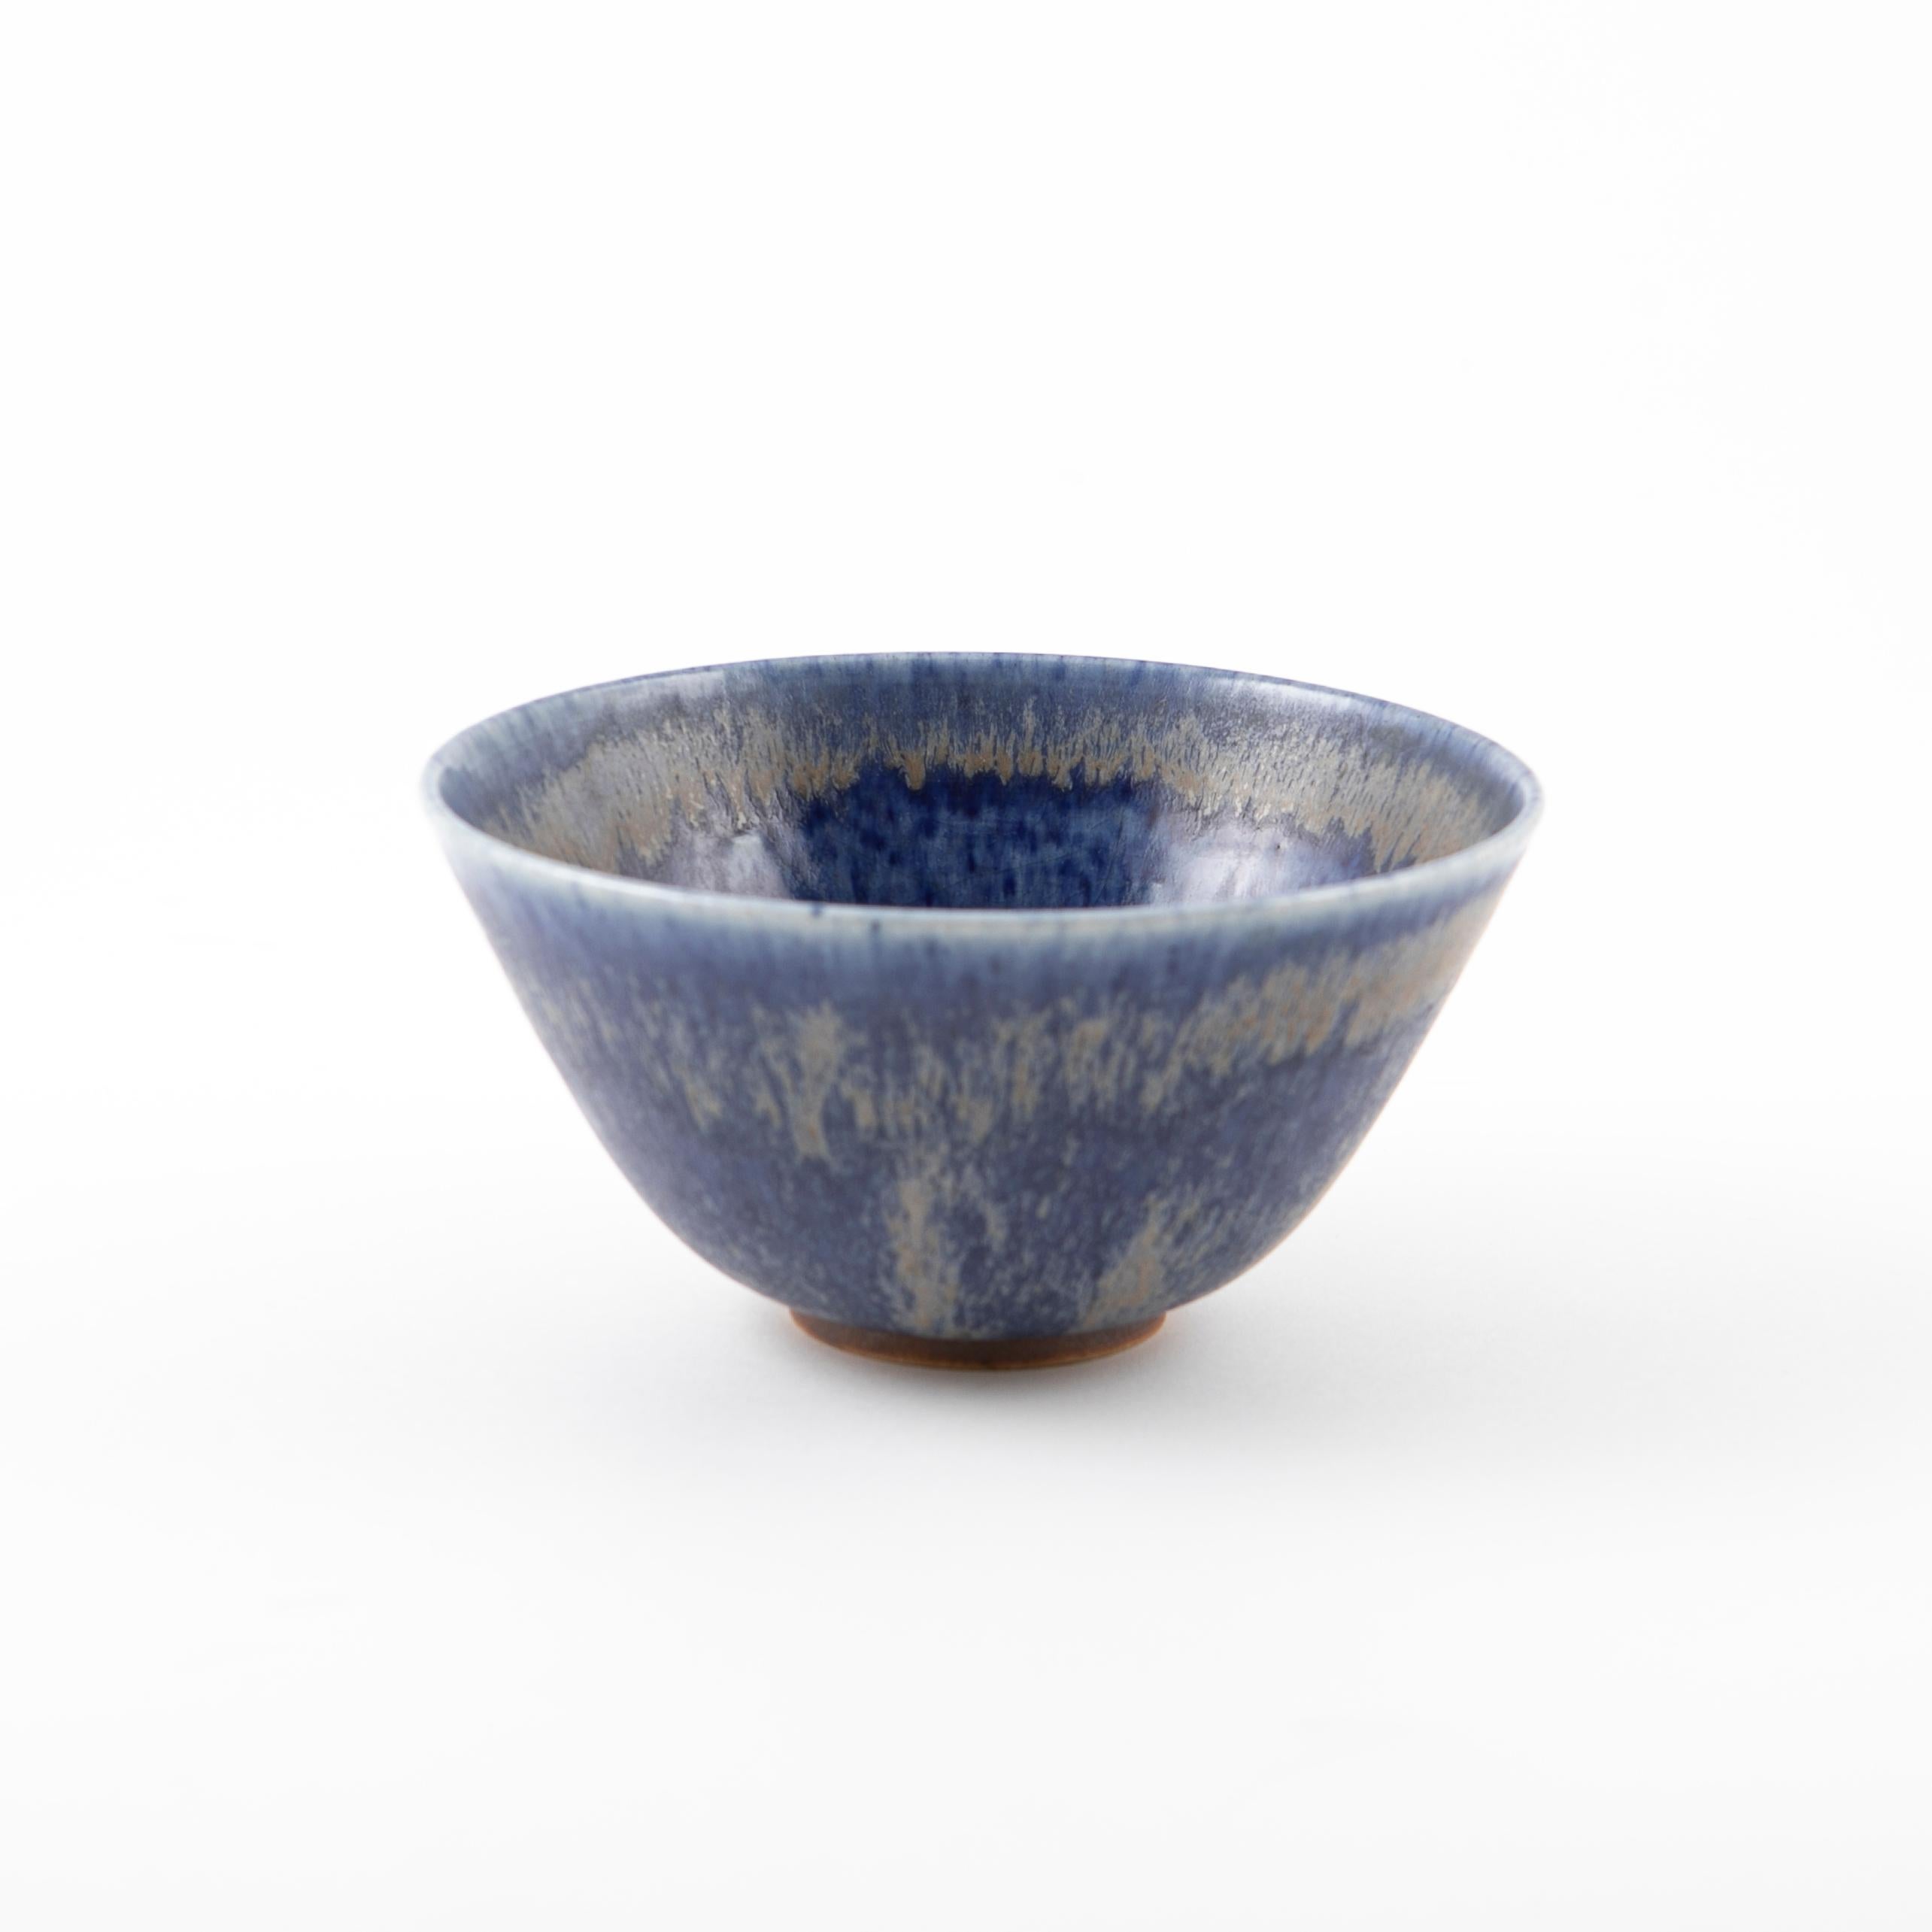 Danish midcentury ceramic bowl from the legendary workshop Saxbo, made circa 1950s.
Made in stoneware with a blue and grey-brown glaze.
Marked Saxbo 3 IV.

The bowl is 8 cm heigh and 15 cm in diameter - in mint condition.